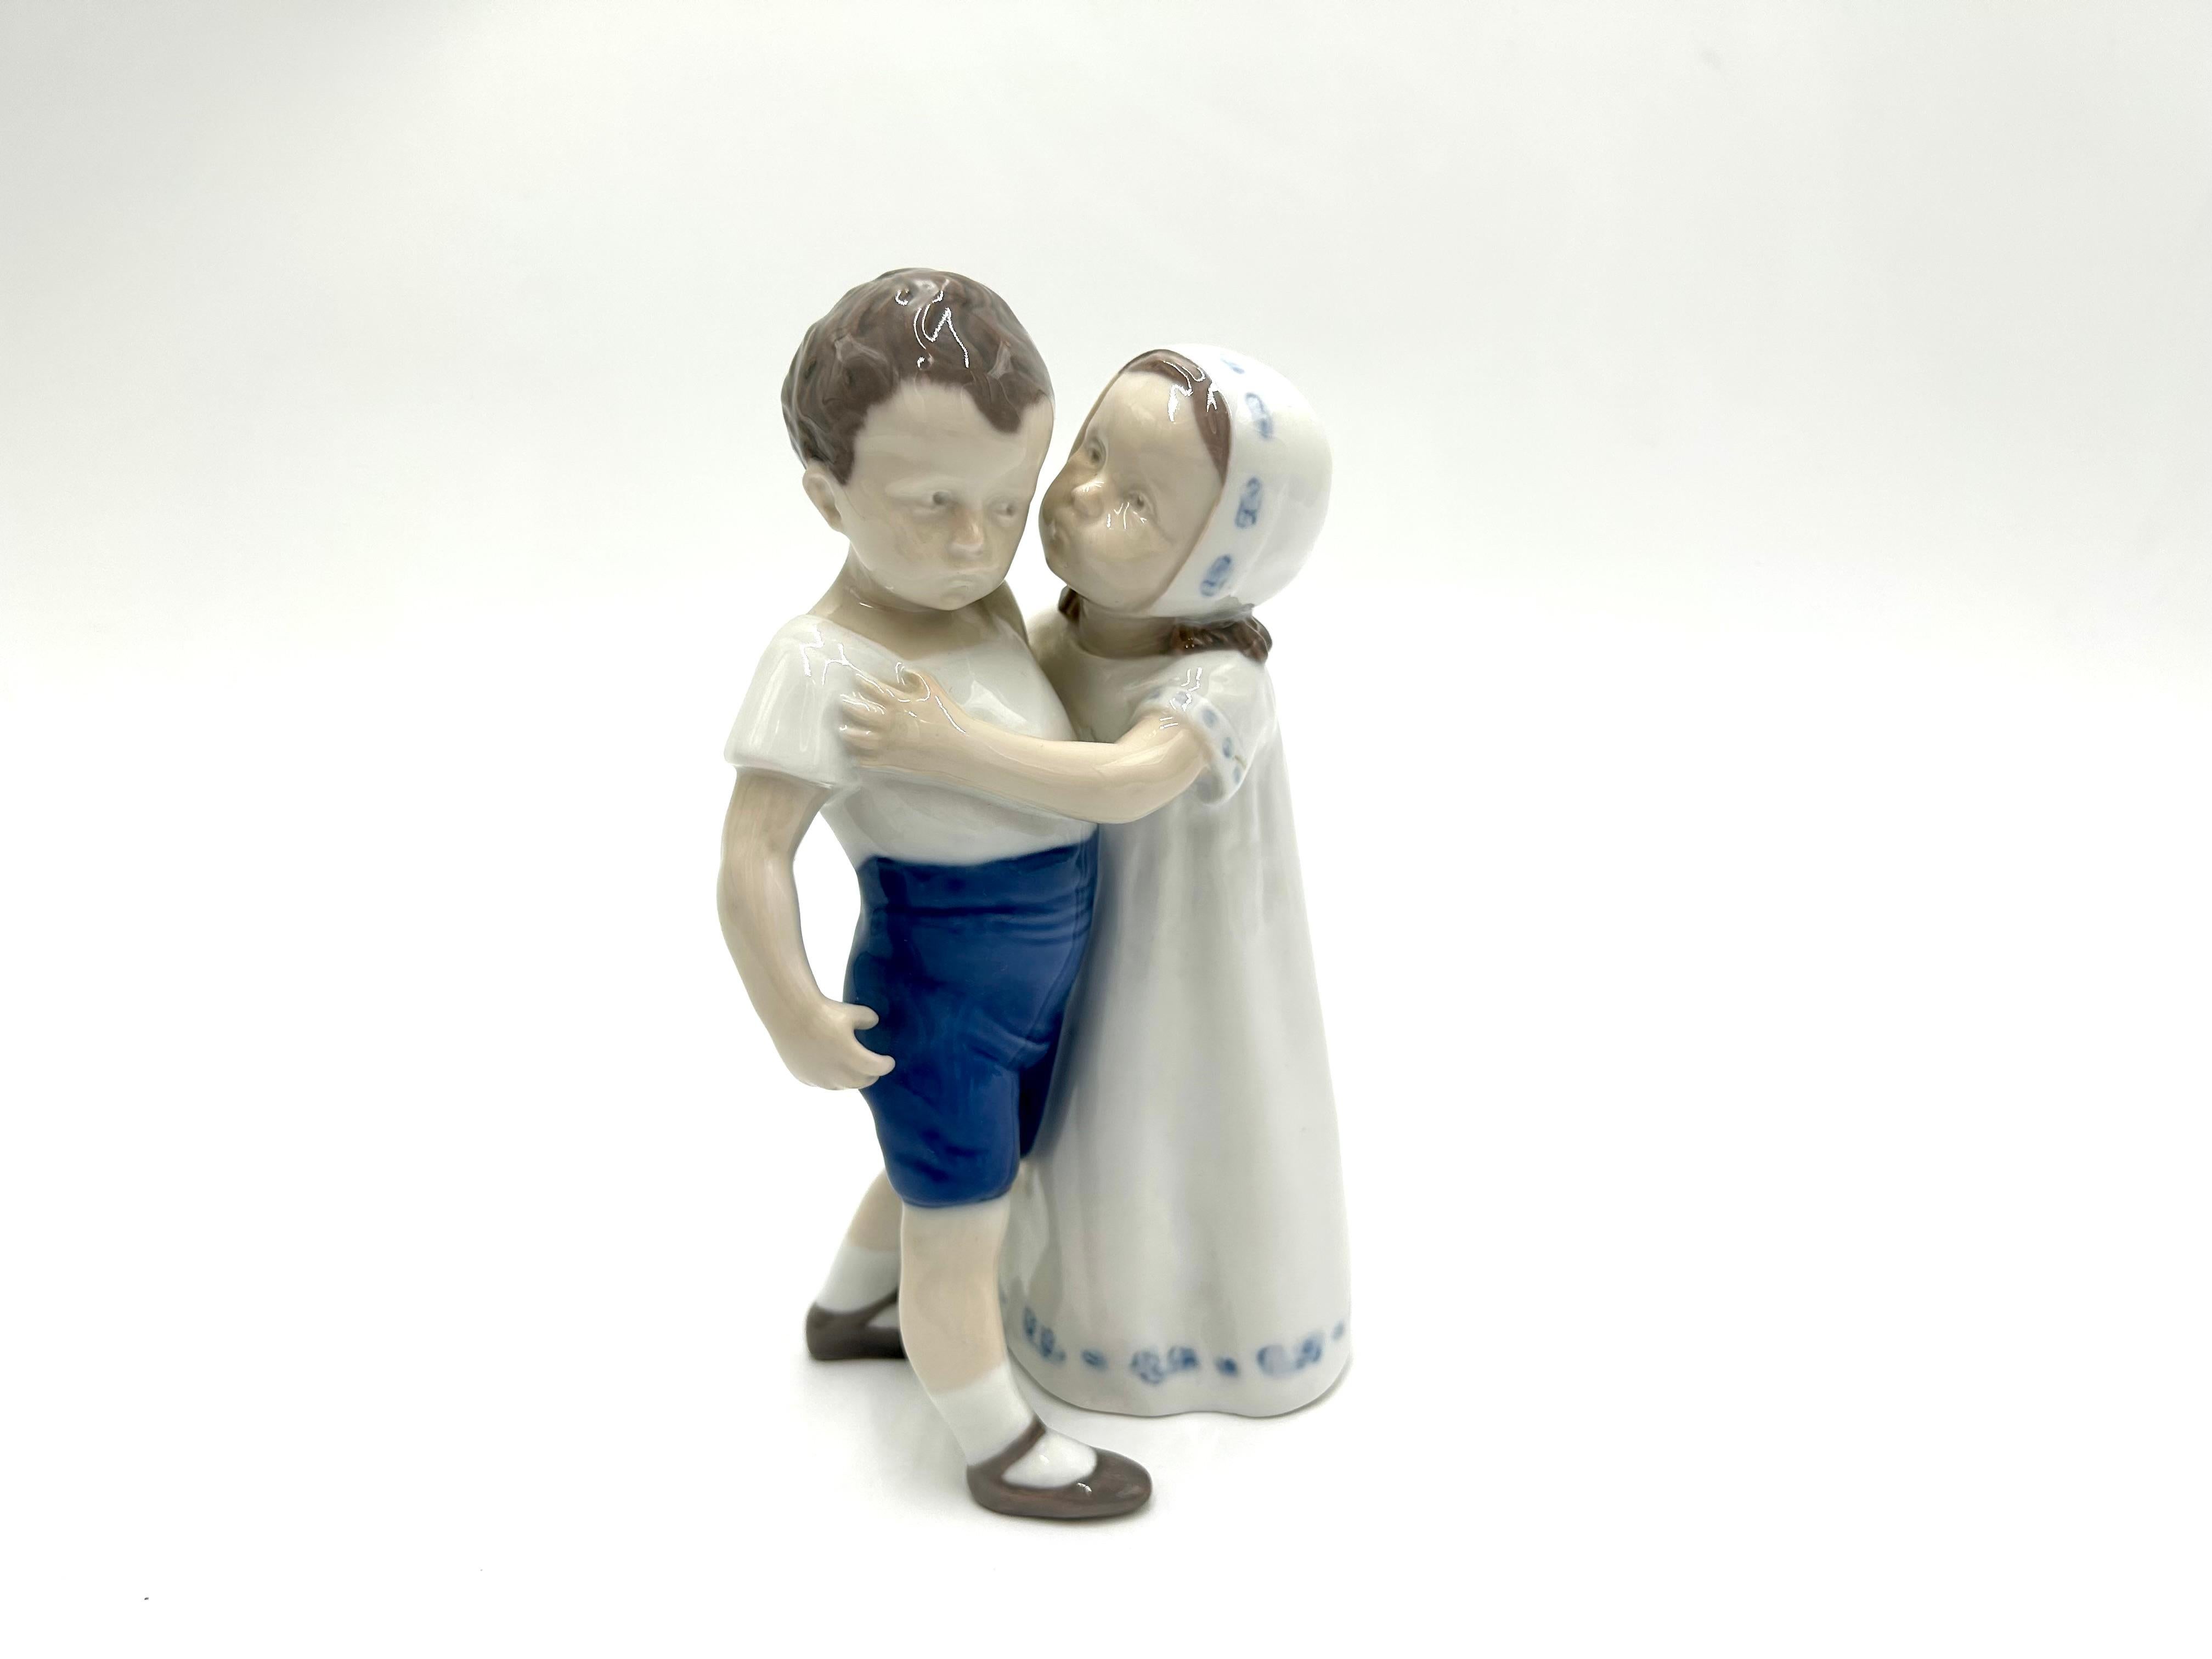 Porcelain figurine of a girl kissing a boy
Produced by the Danish manufactory Bing & Grondahl
The mark is used in the 1960s
Very good condition without damage
Measures: height: 17cm
width: 11cm
depth: 9cm.